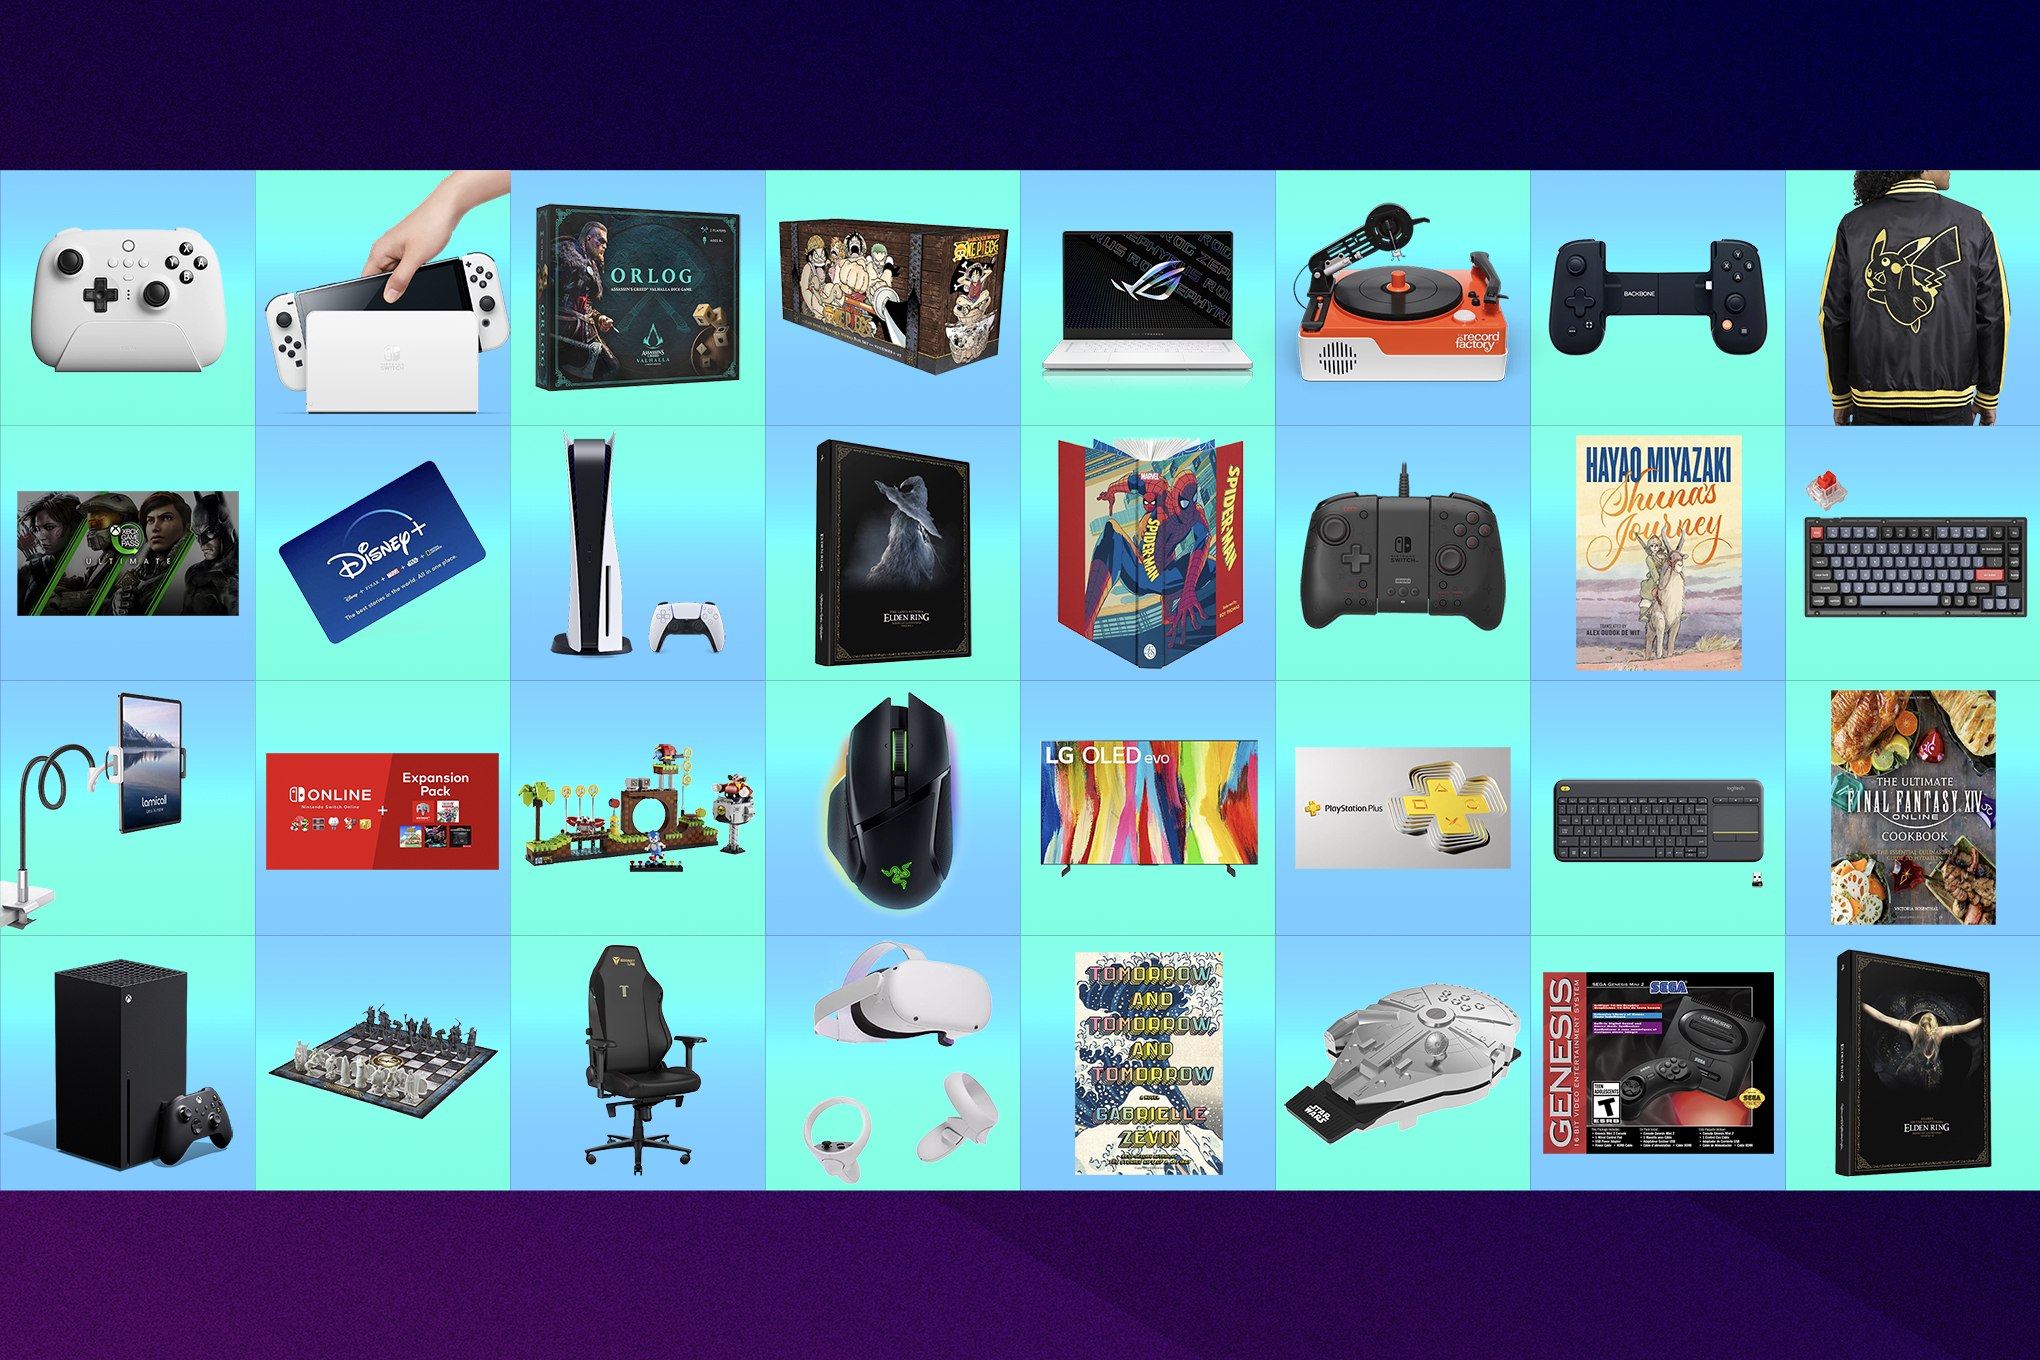 A grid shows 32 different gift ideas such as game consoles, controllers, and chairs